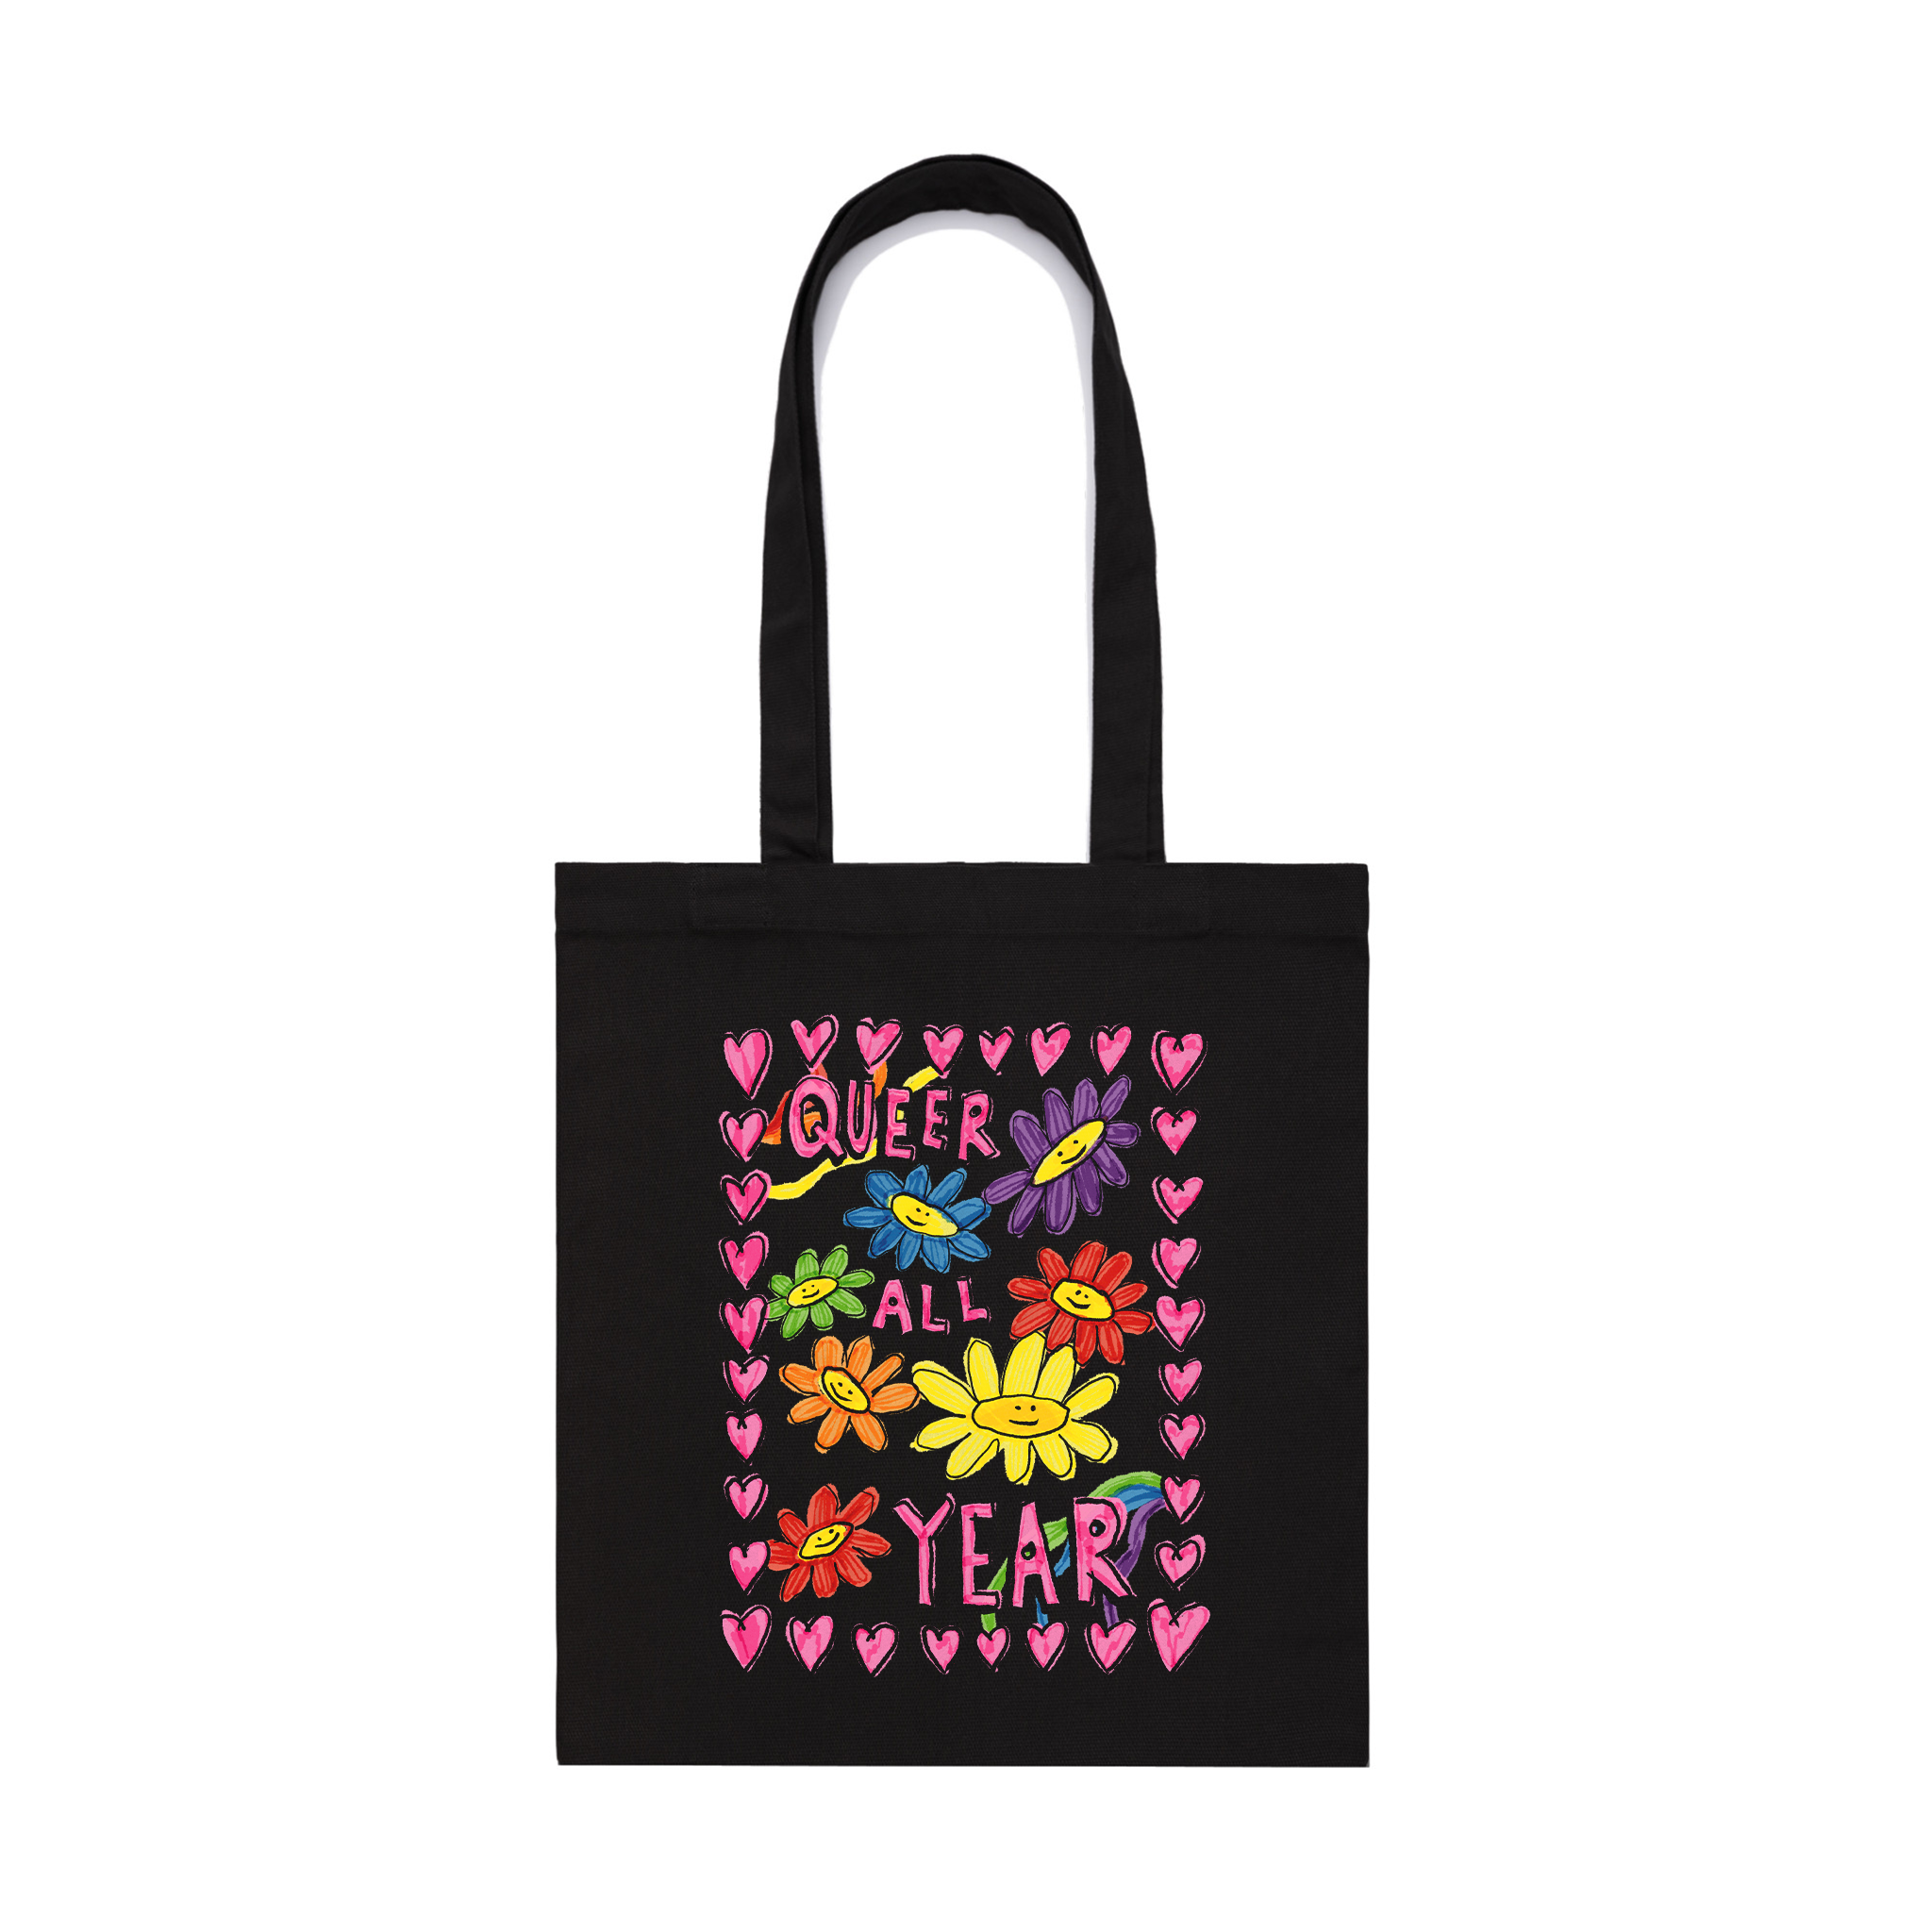 Queer All Year Tote